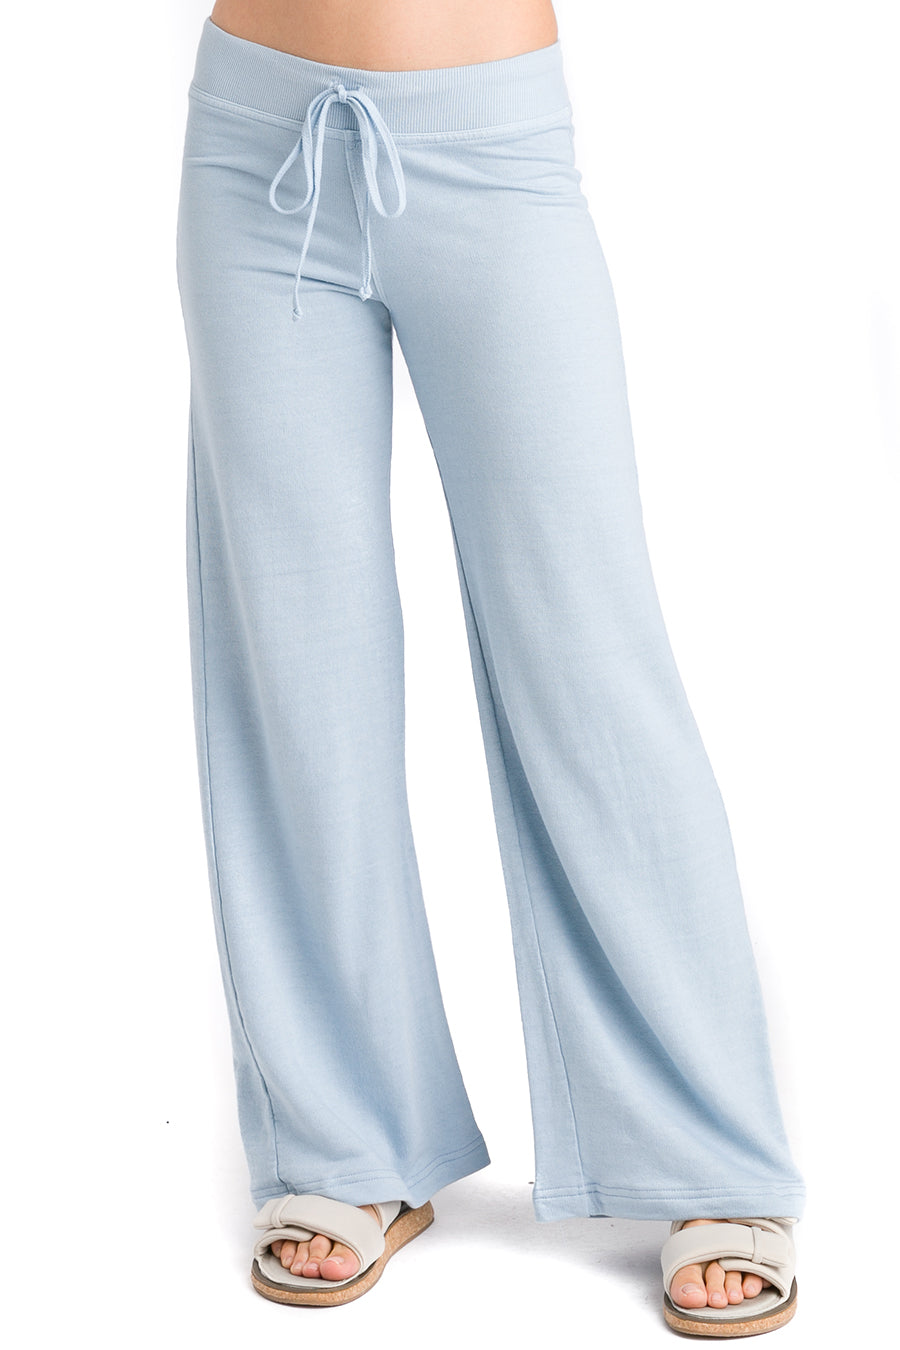 Hard Tail Forever Wide Leg Sweatpant - Dawn